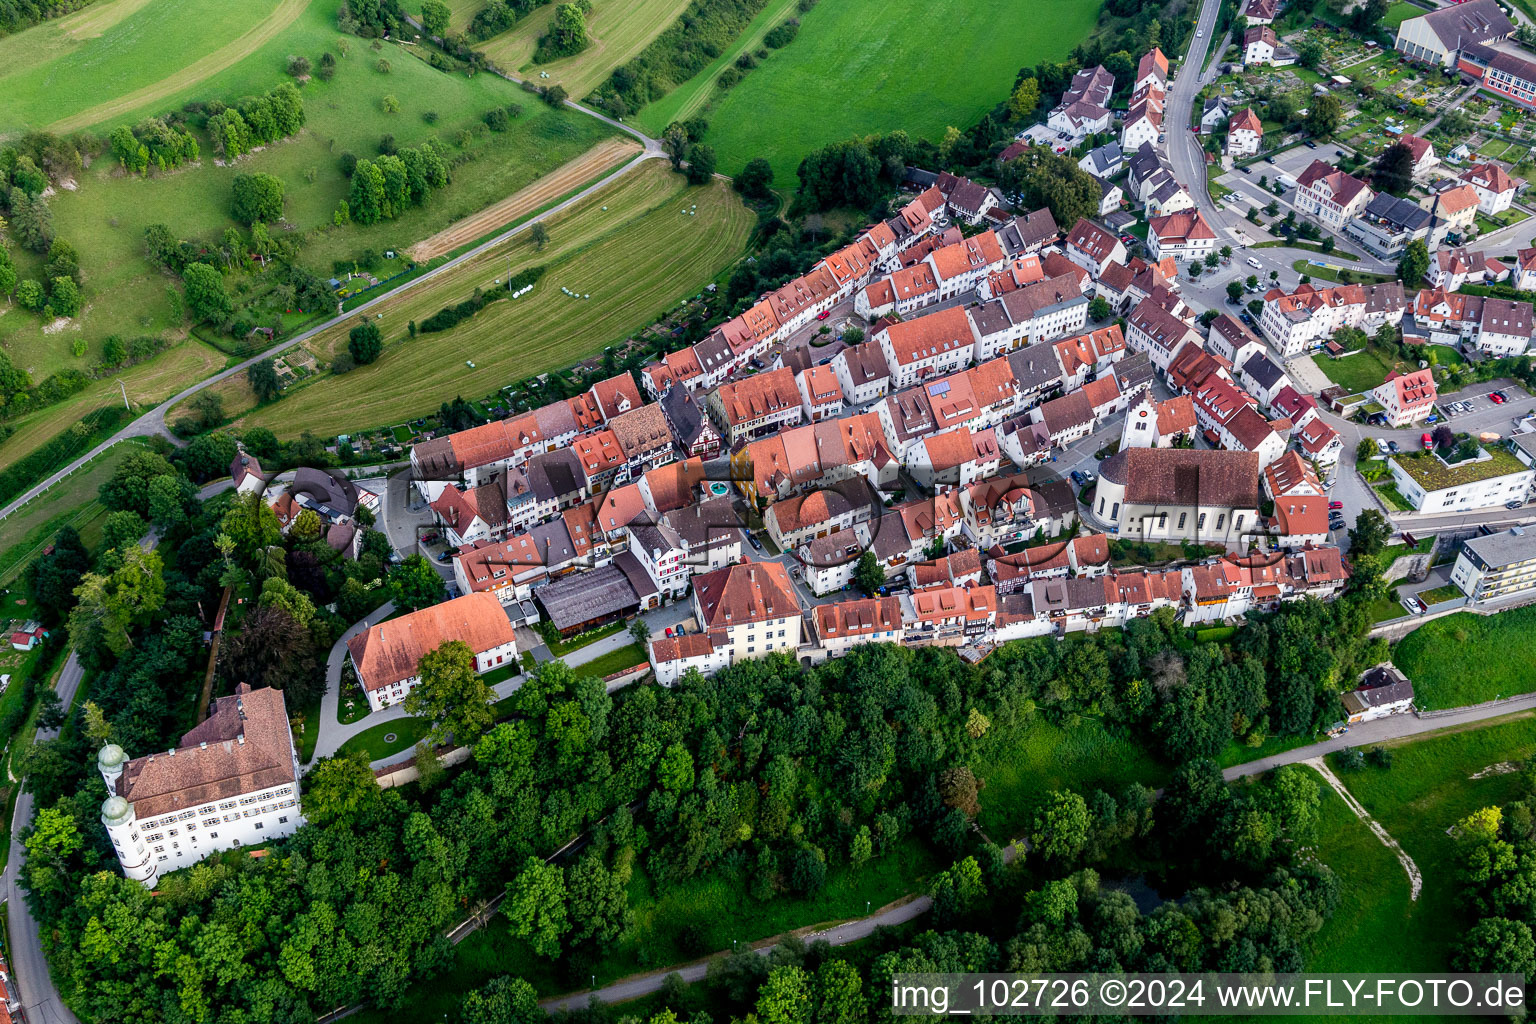 Aerial view of Church building in Old Town- center of downtown in Muehlheim an der Donau in the state Baden-Wurttemberg, Germany